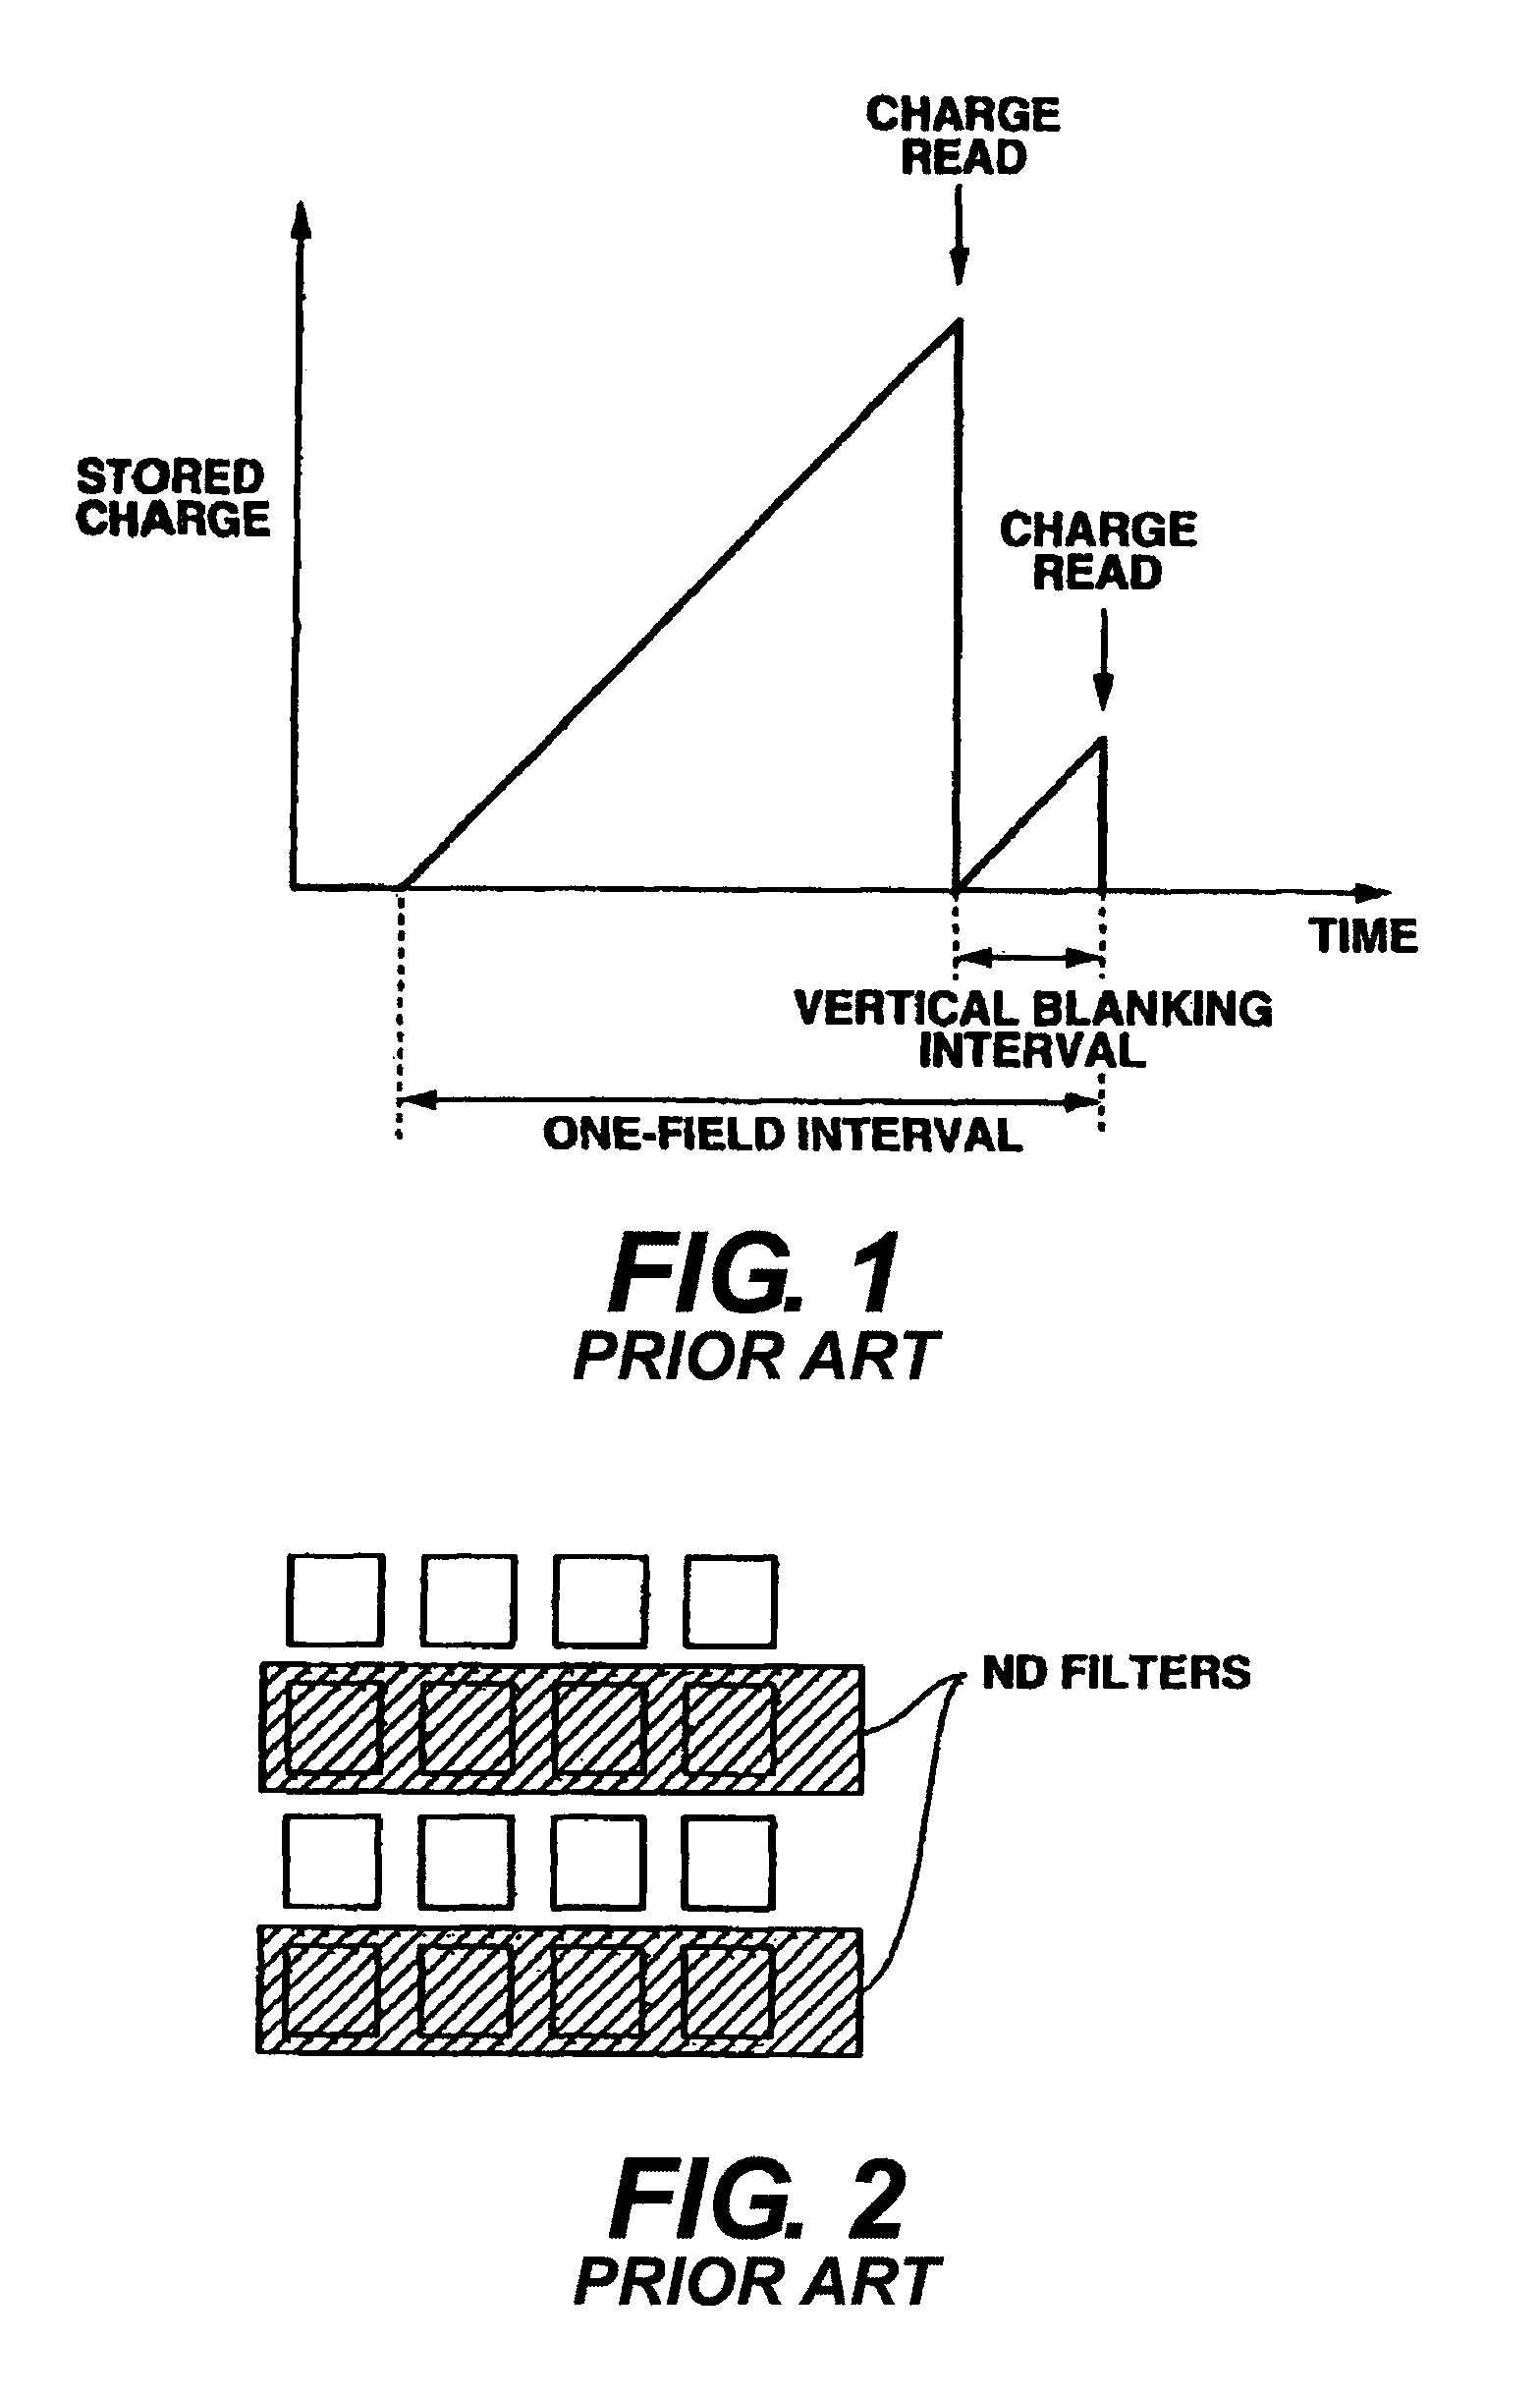 Methods and systems for synthesizing pickup images